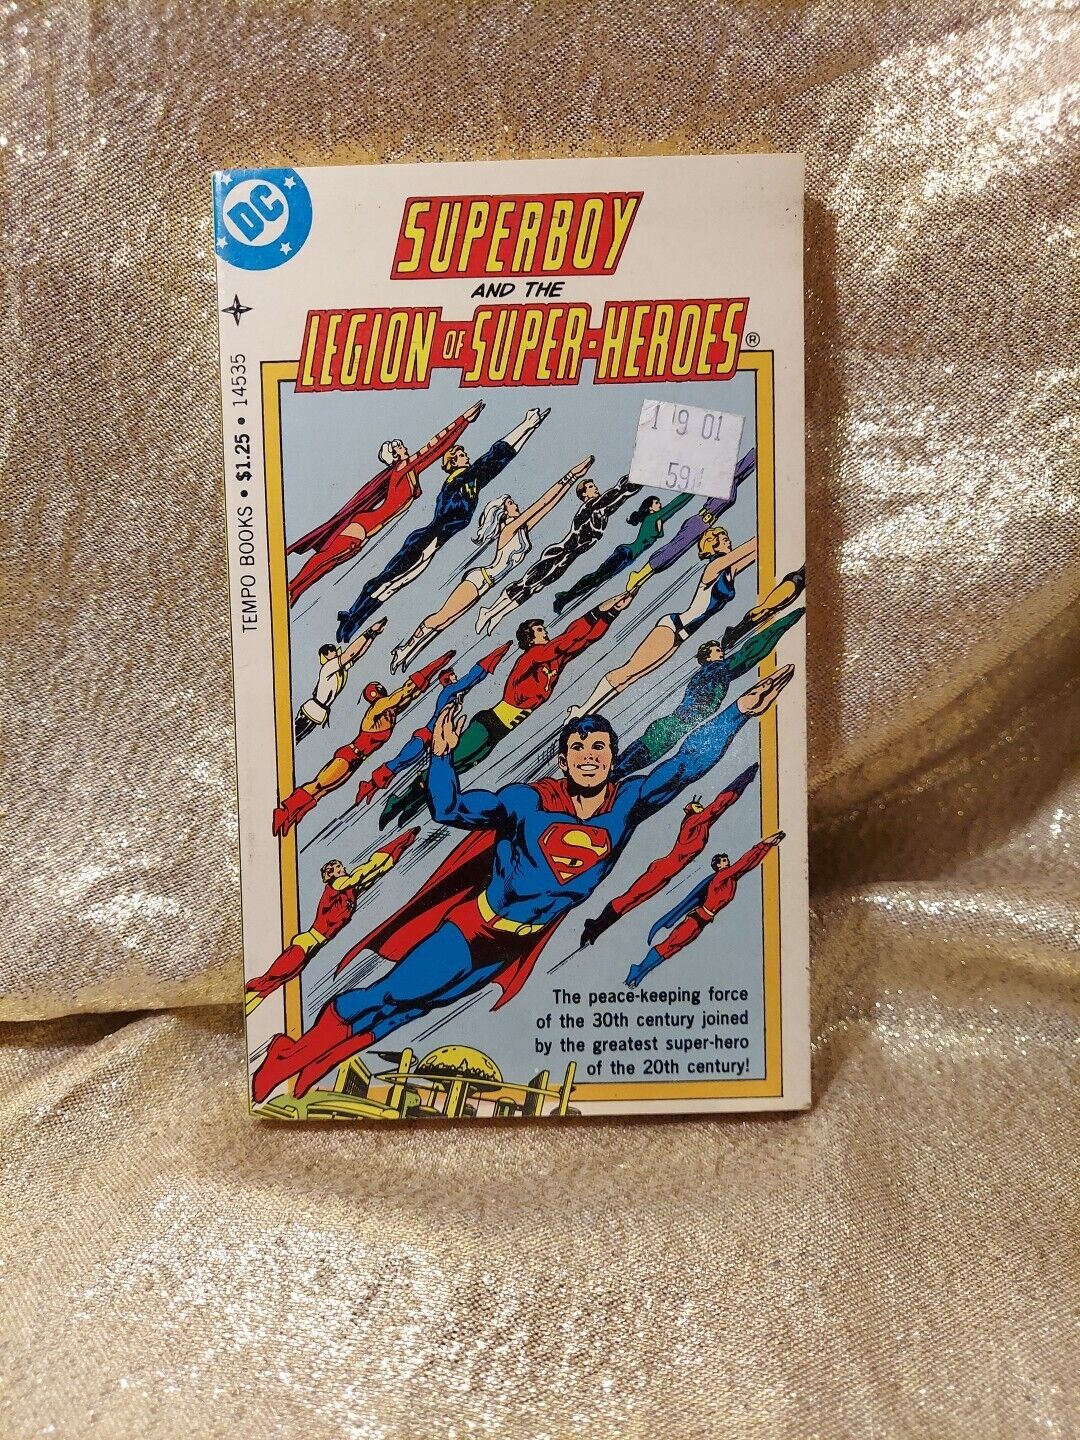 Superboy and the Legion of Super-Heroes Tempo Books 1977 Pocket Book Paperback